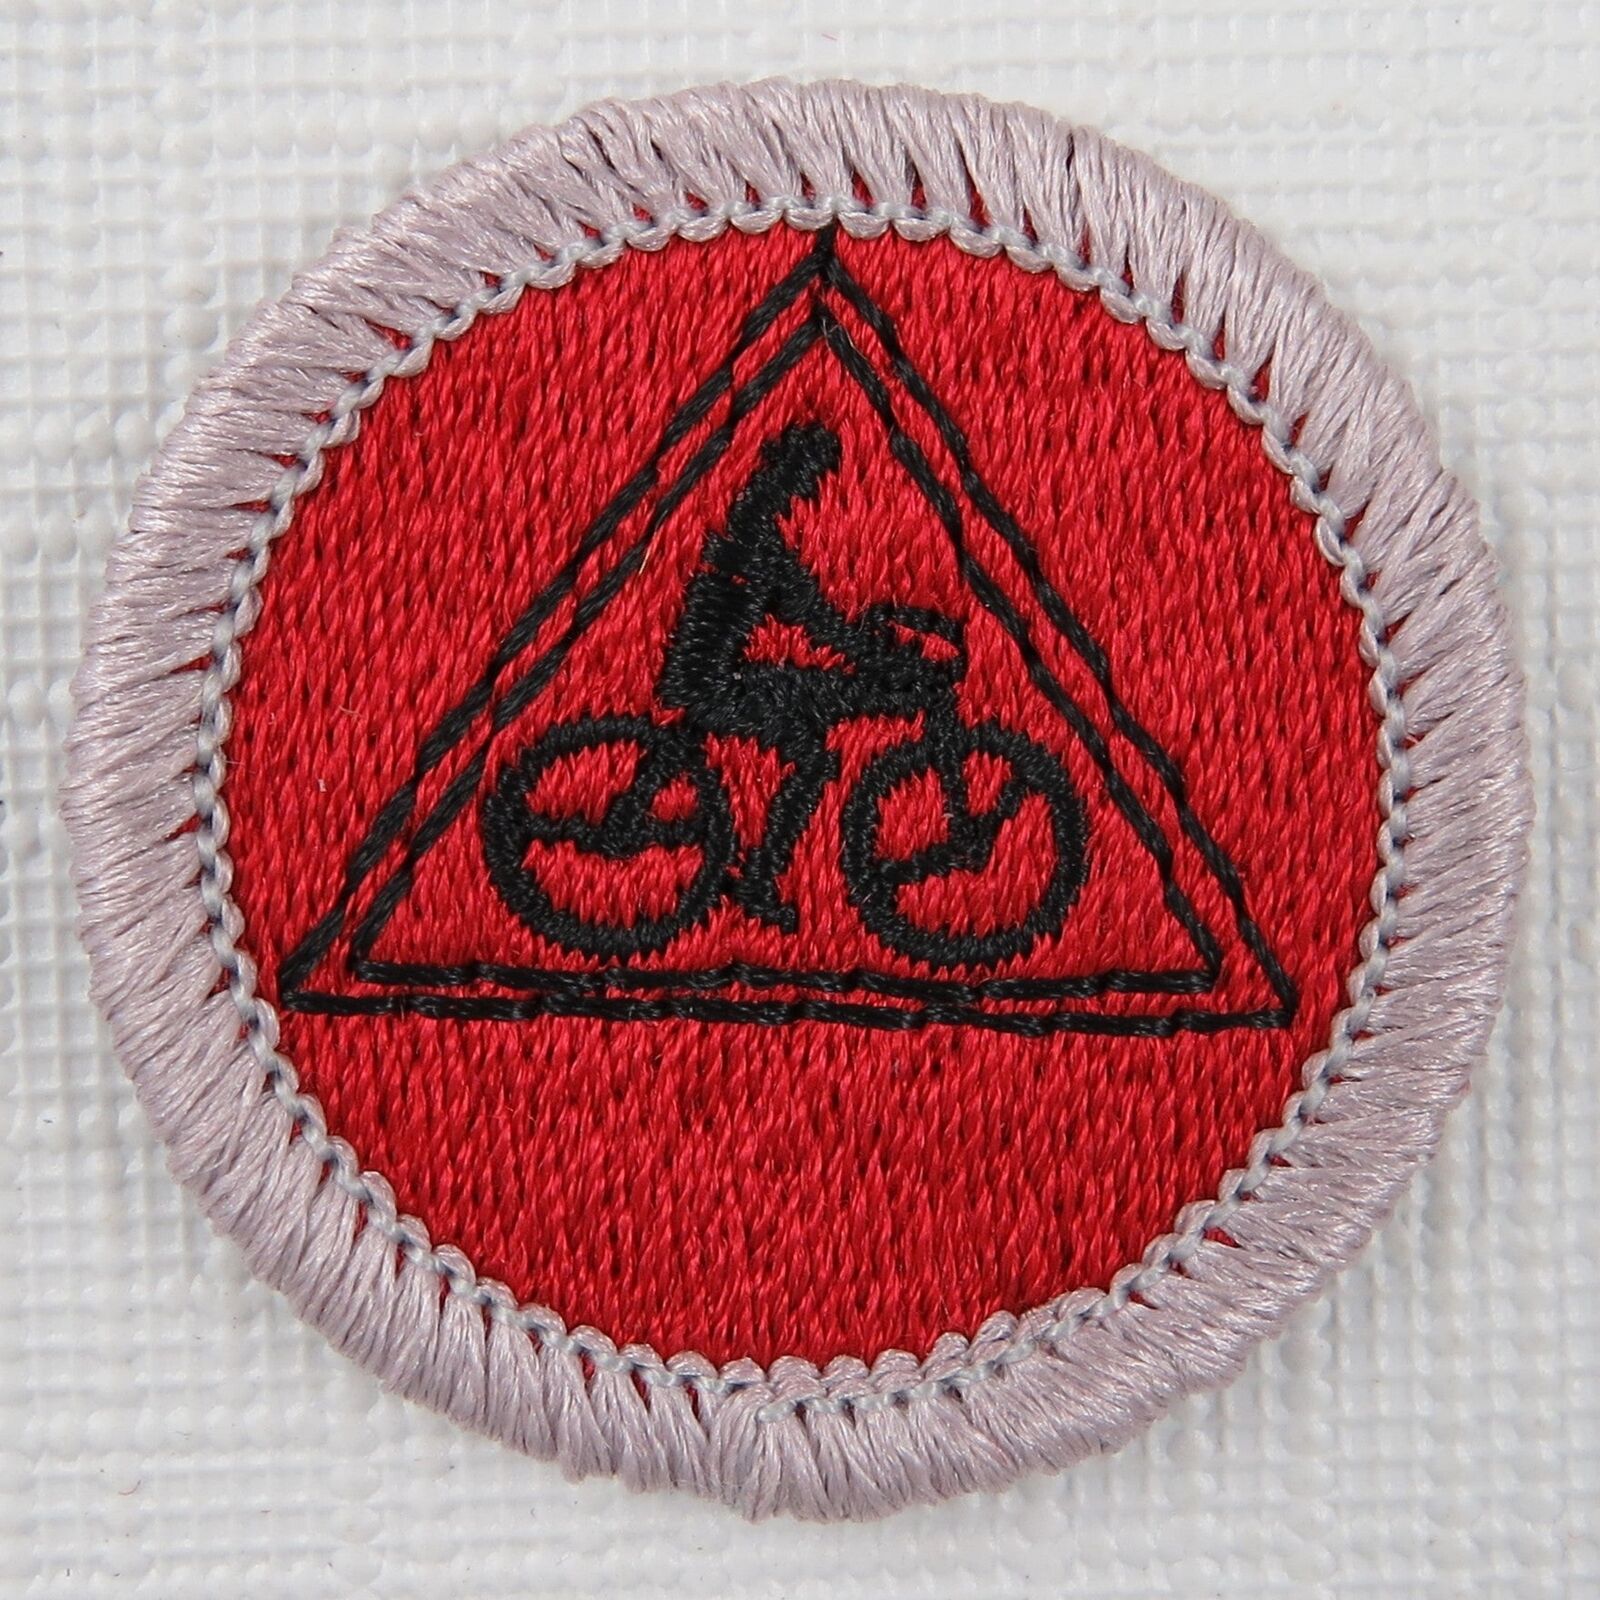 Cycling (Triangle-Silver) Current Plastic Back Merit Badge [MB-432]